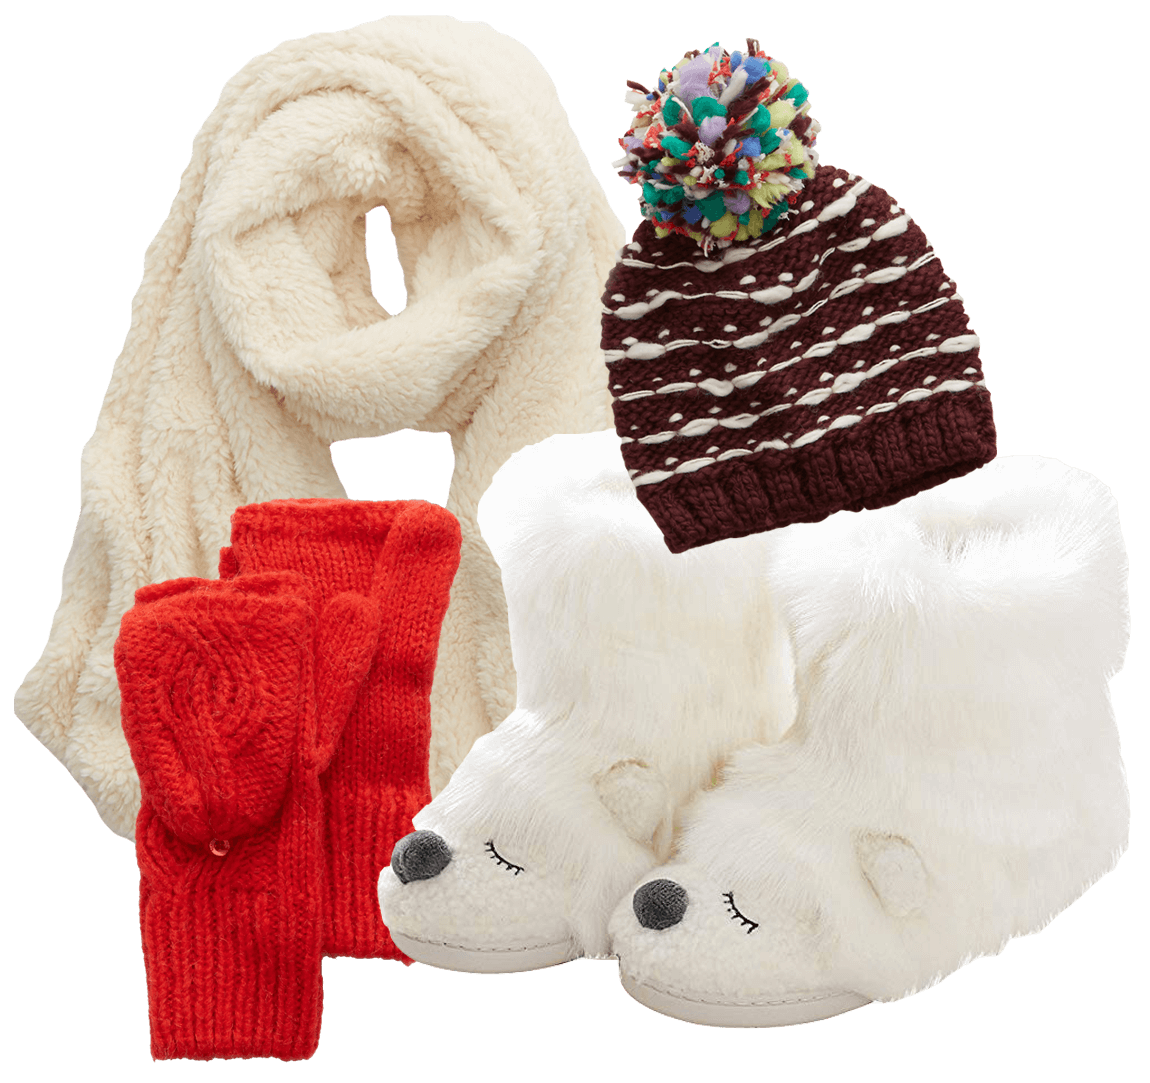 scarf, hat, mittens, slippers